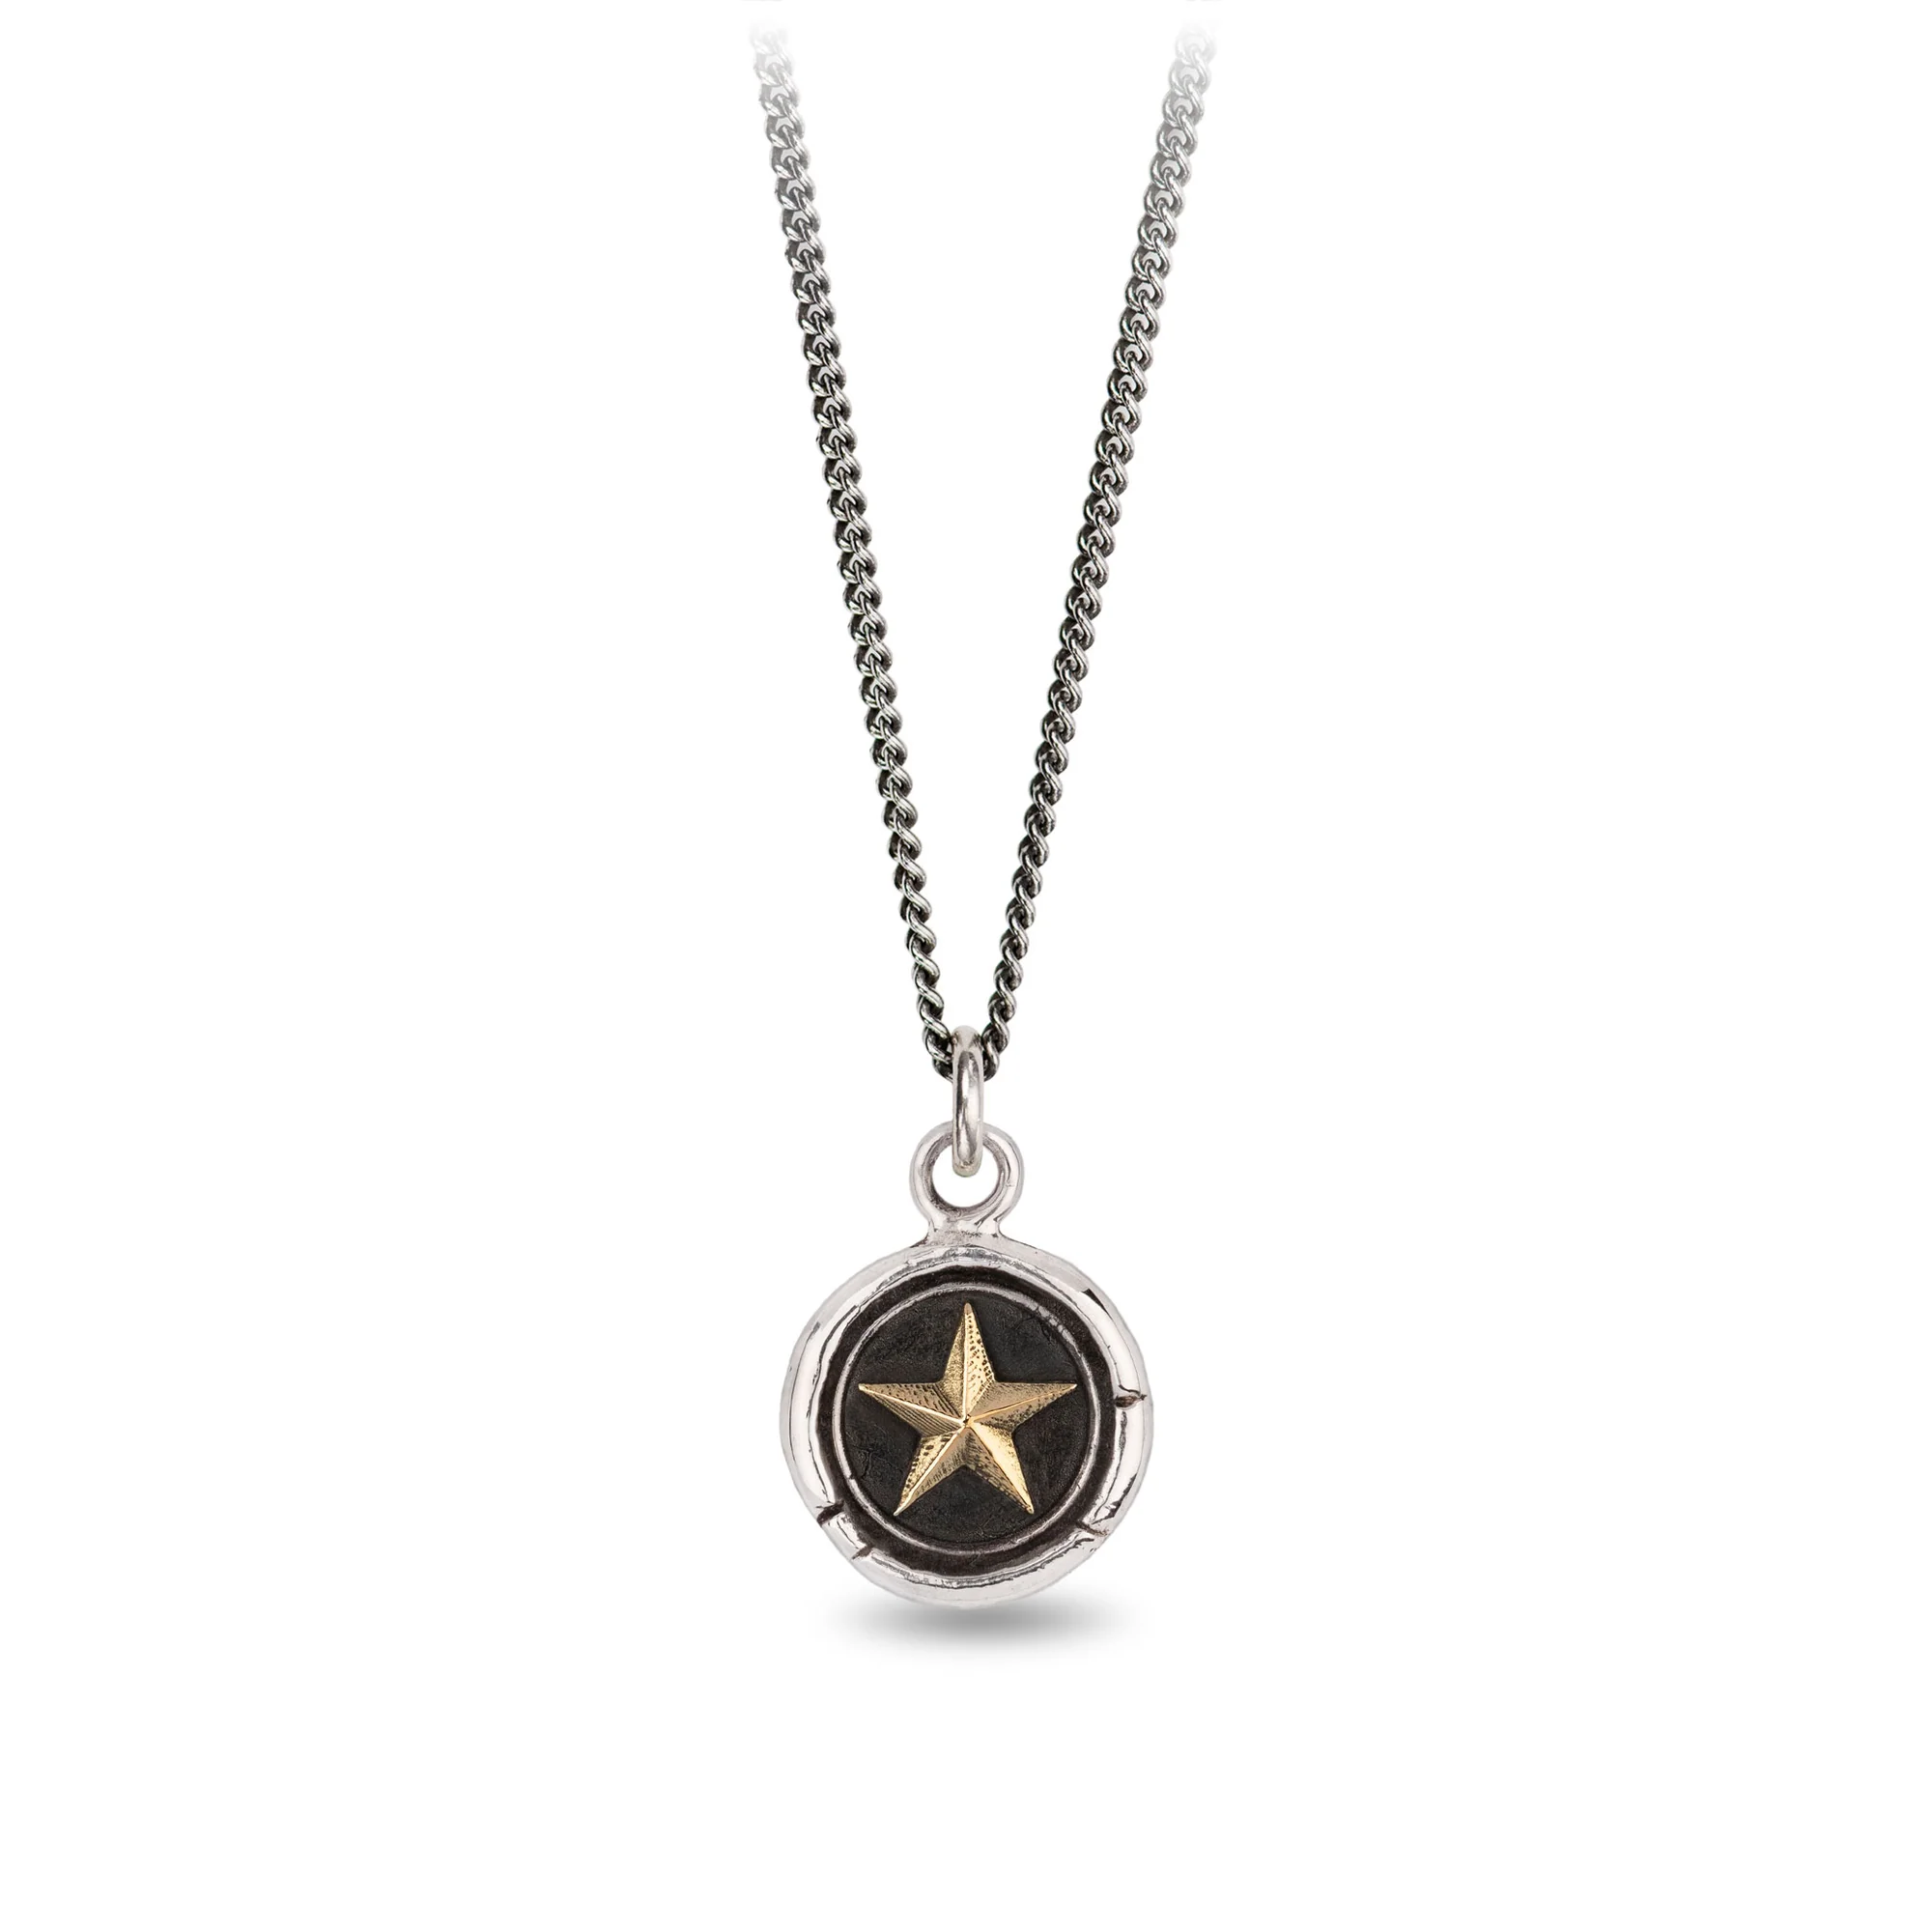 Highest Ambitions 14k Gold On Silver Talisman | Magpie Jewellery